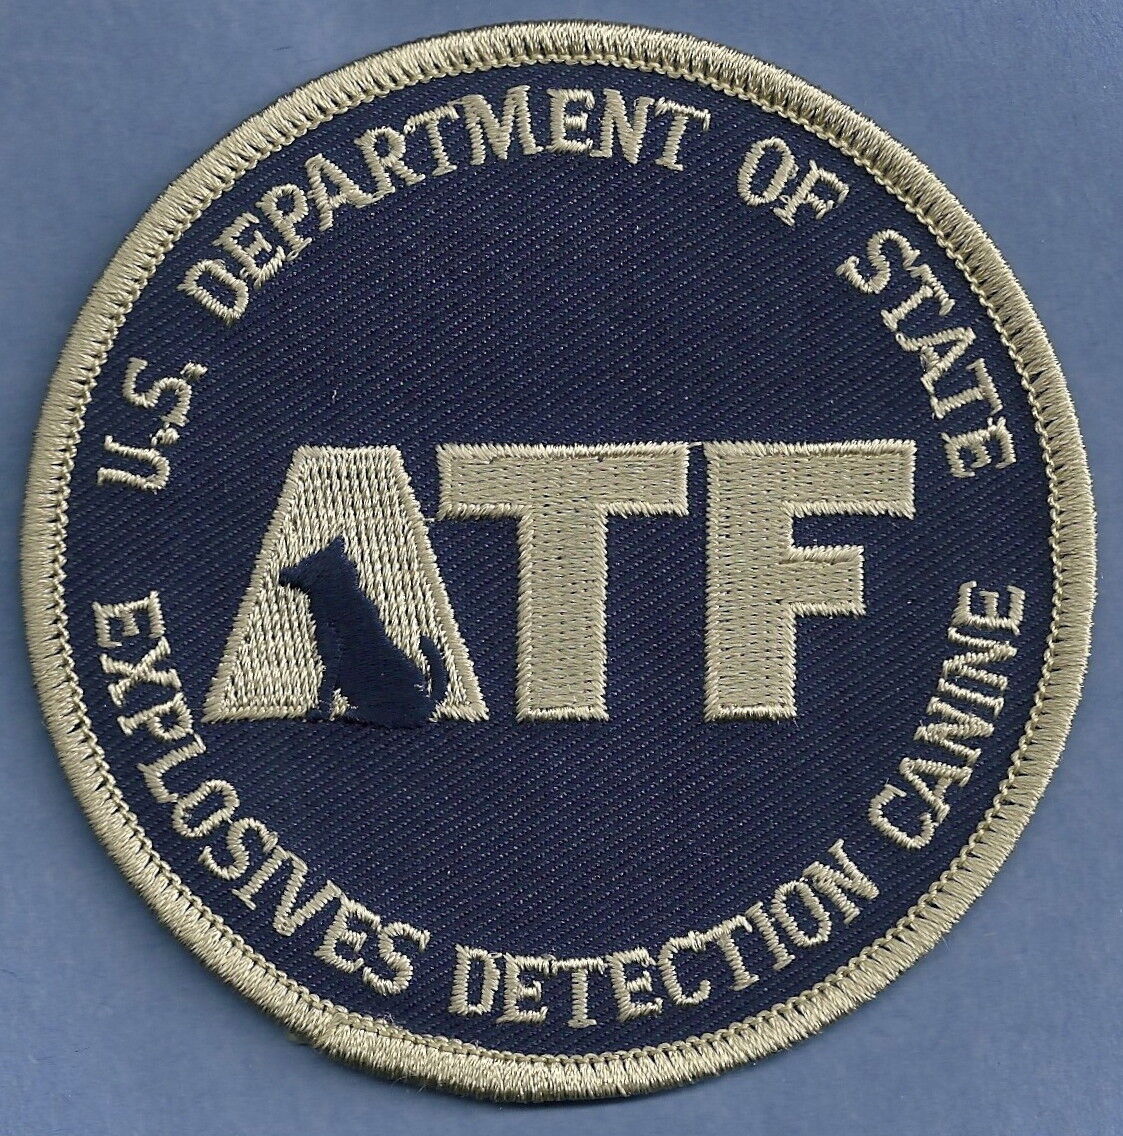 ATF ALCOHOL TOBACCO & FIREARMS EXPLOSIVES DETECTION K-9 POLICE PATCH